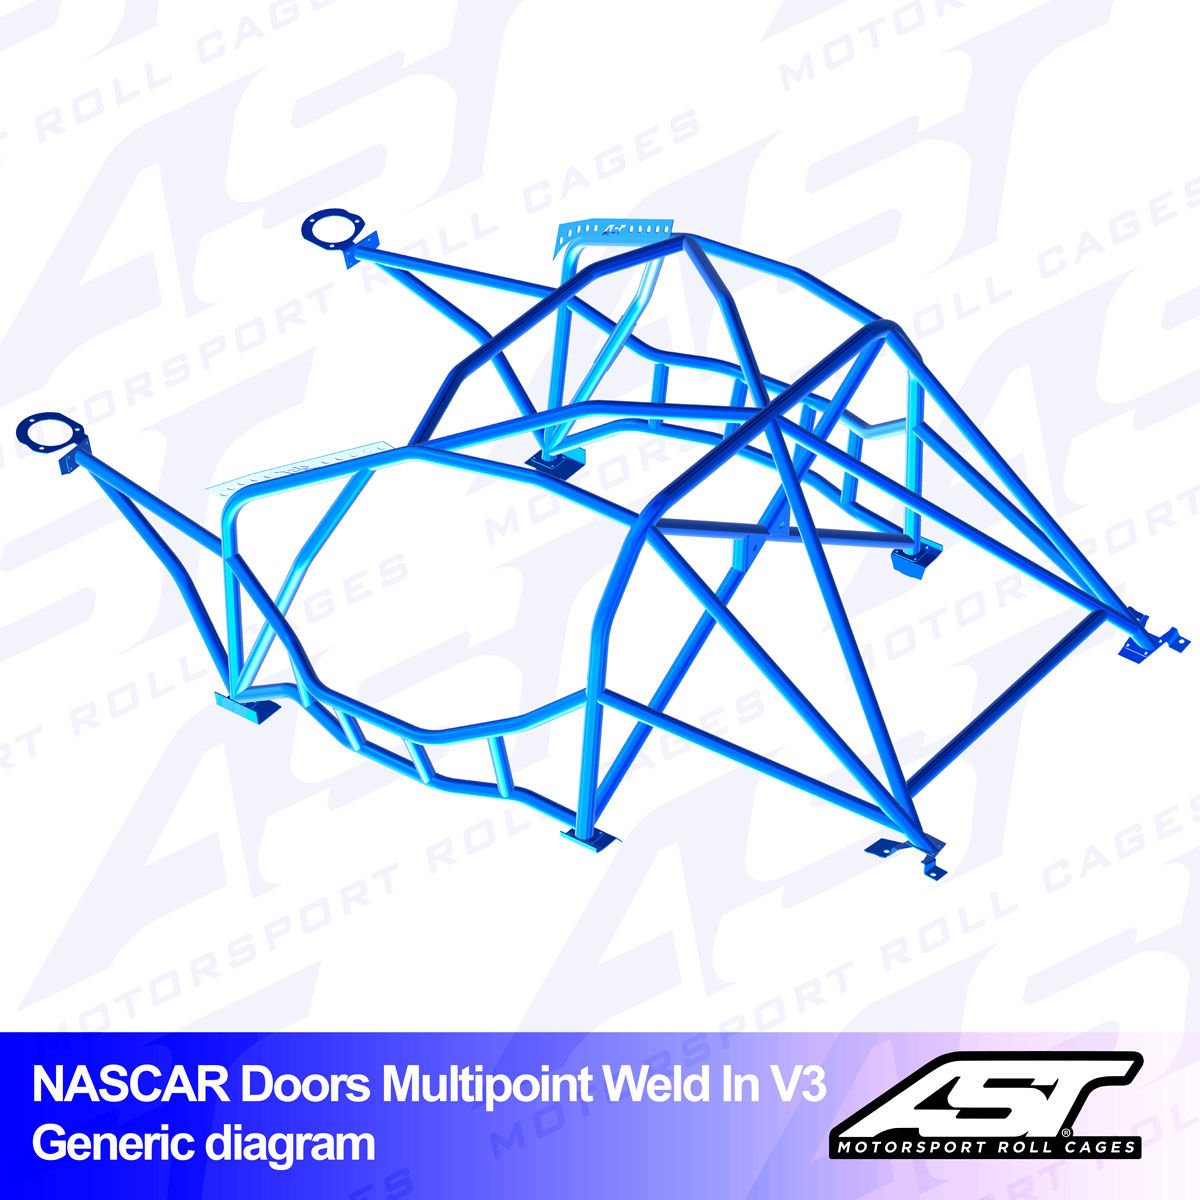 Roll Cage BMW (E34) 5-Series 5-doors Touring RWD MULTIPOINT WELD IN V3 NASCAR-door for drift